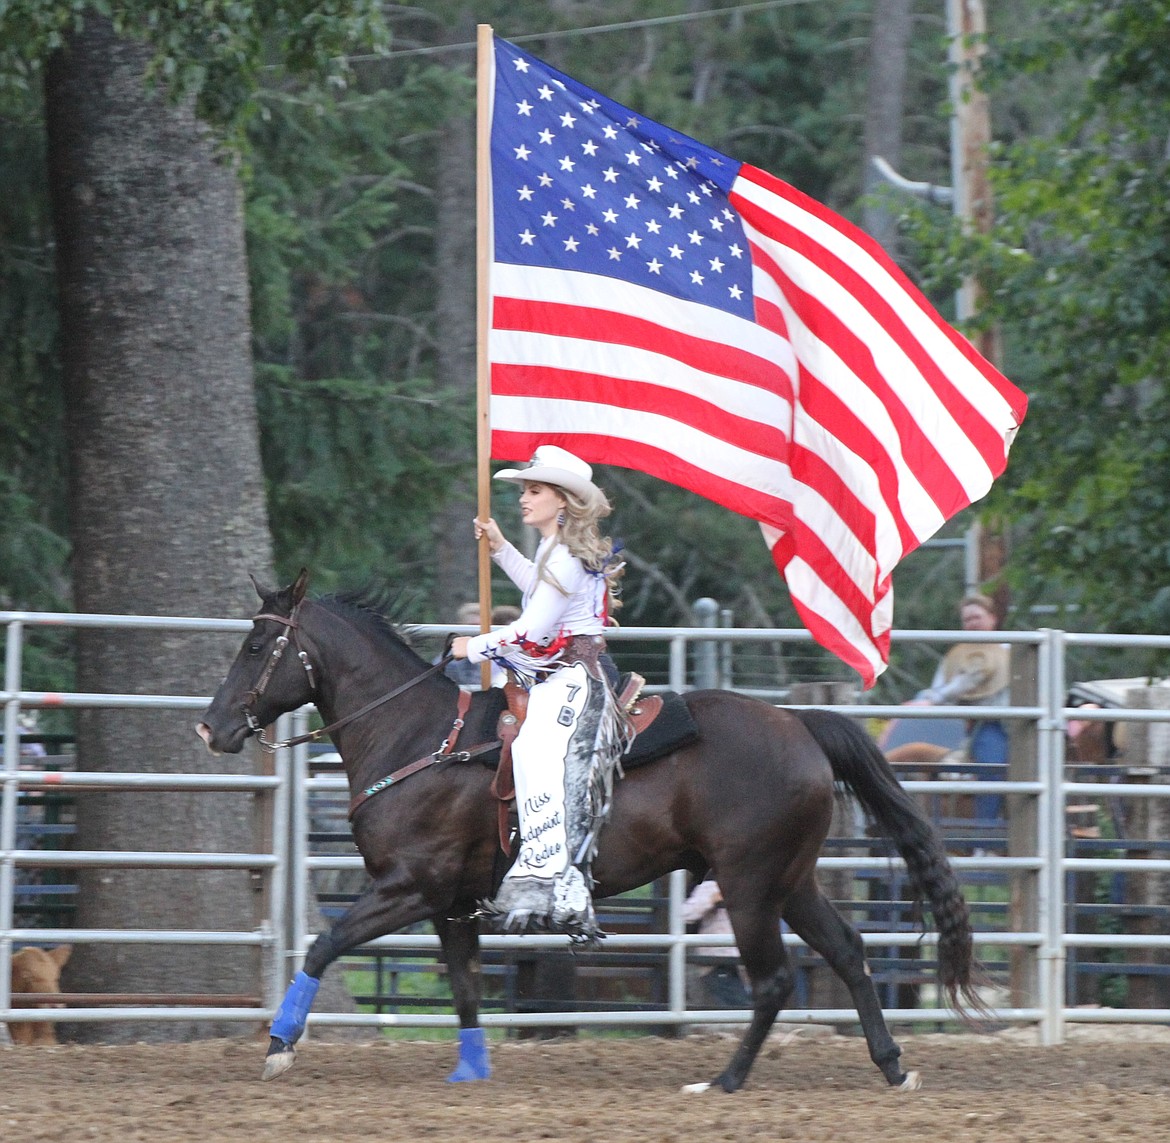 Miss Sandpoint Rodeo, Maddie Gunter, carries the American flag around the arena during the opening ceremonies.